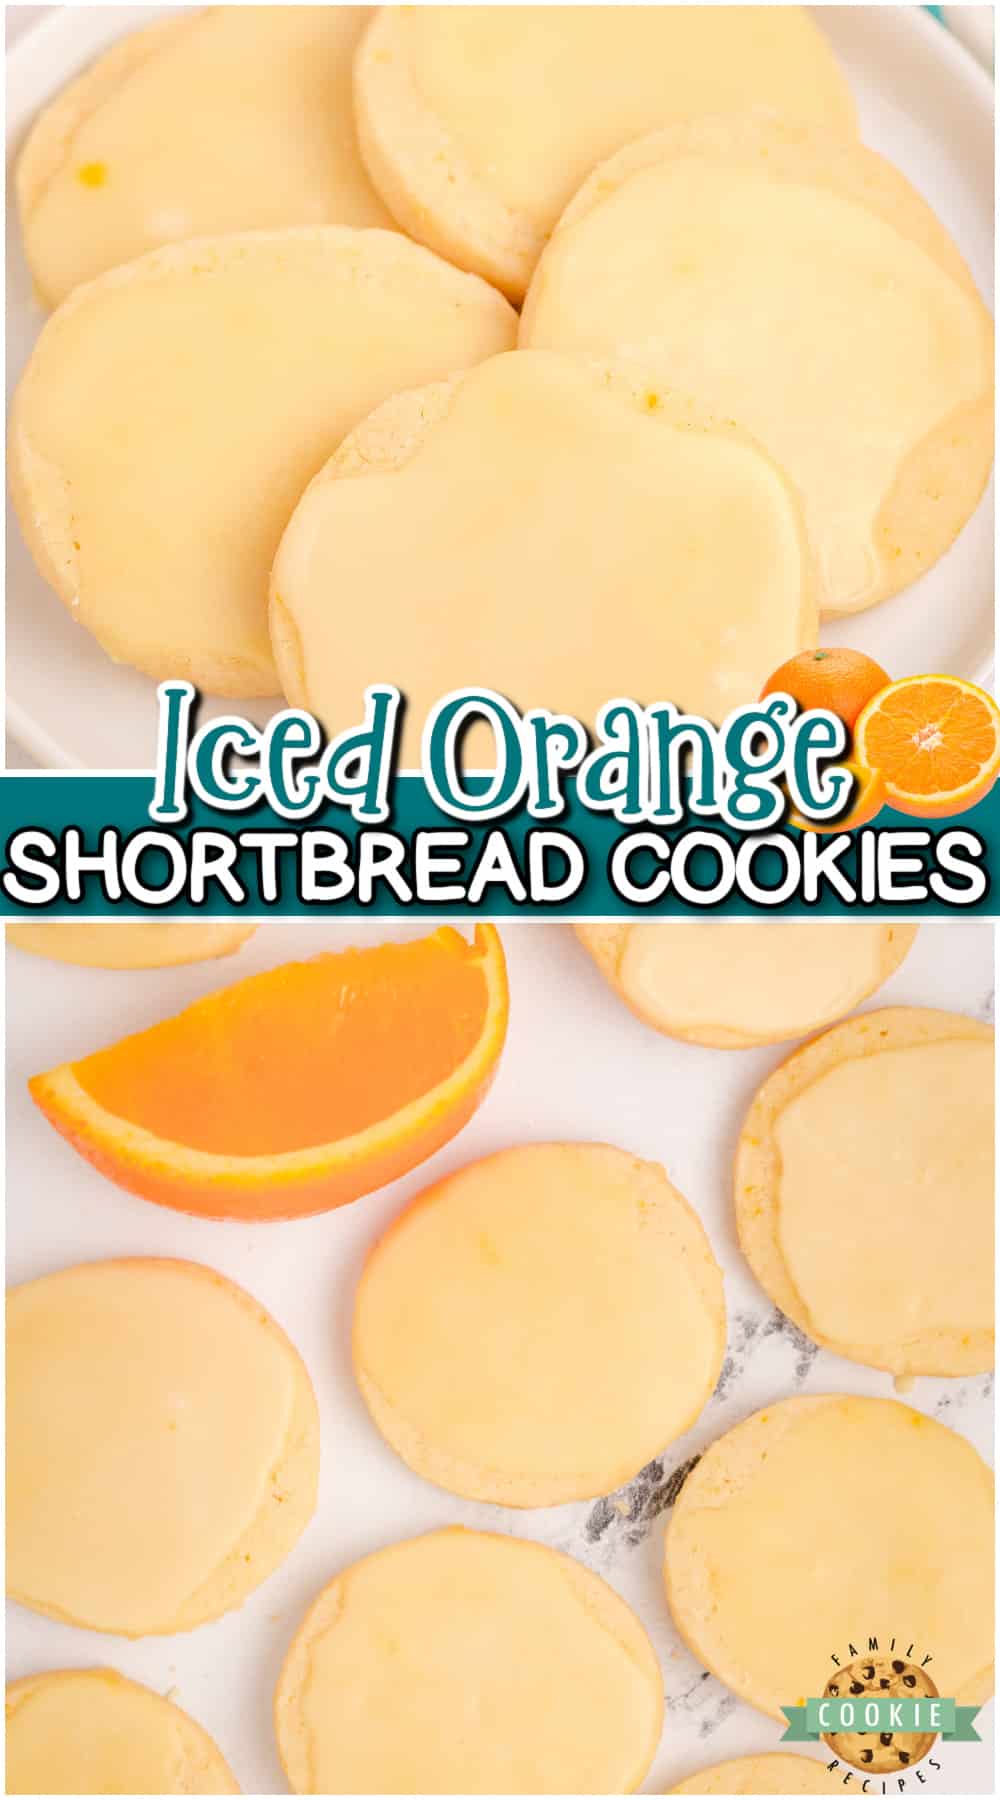 Orange shortbread cookies are a citrus-flavored buttery crisp cookies perfect for afternoon tea. Enjoy these cookies any time of day, as they're sure to brighten it up!